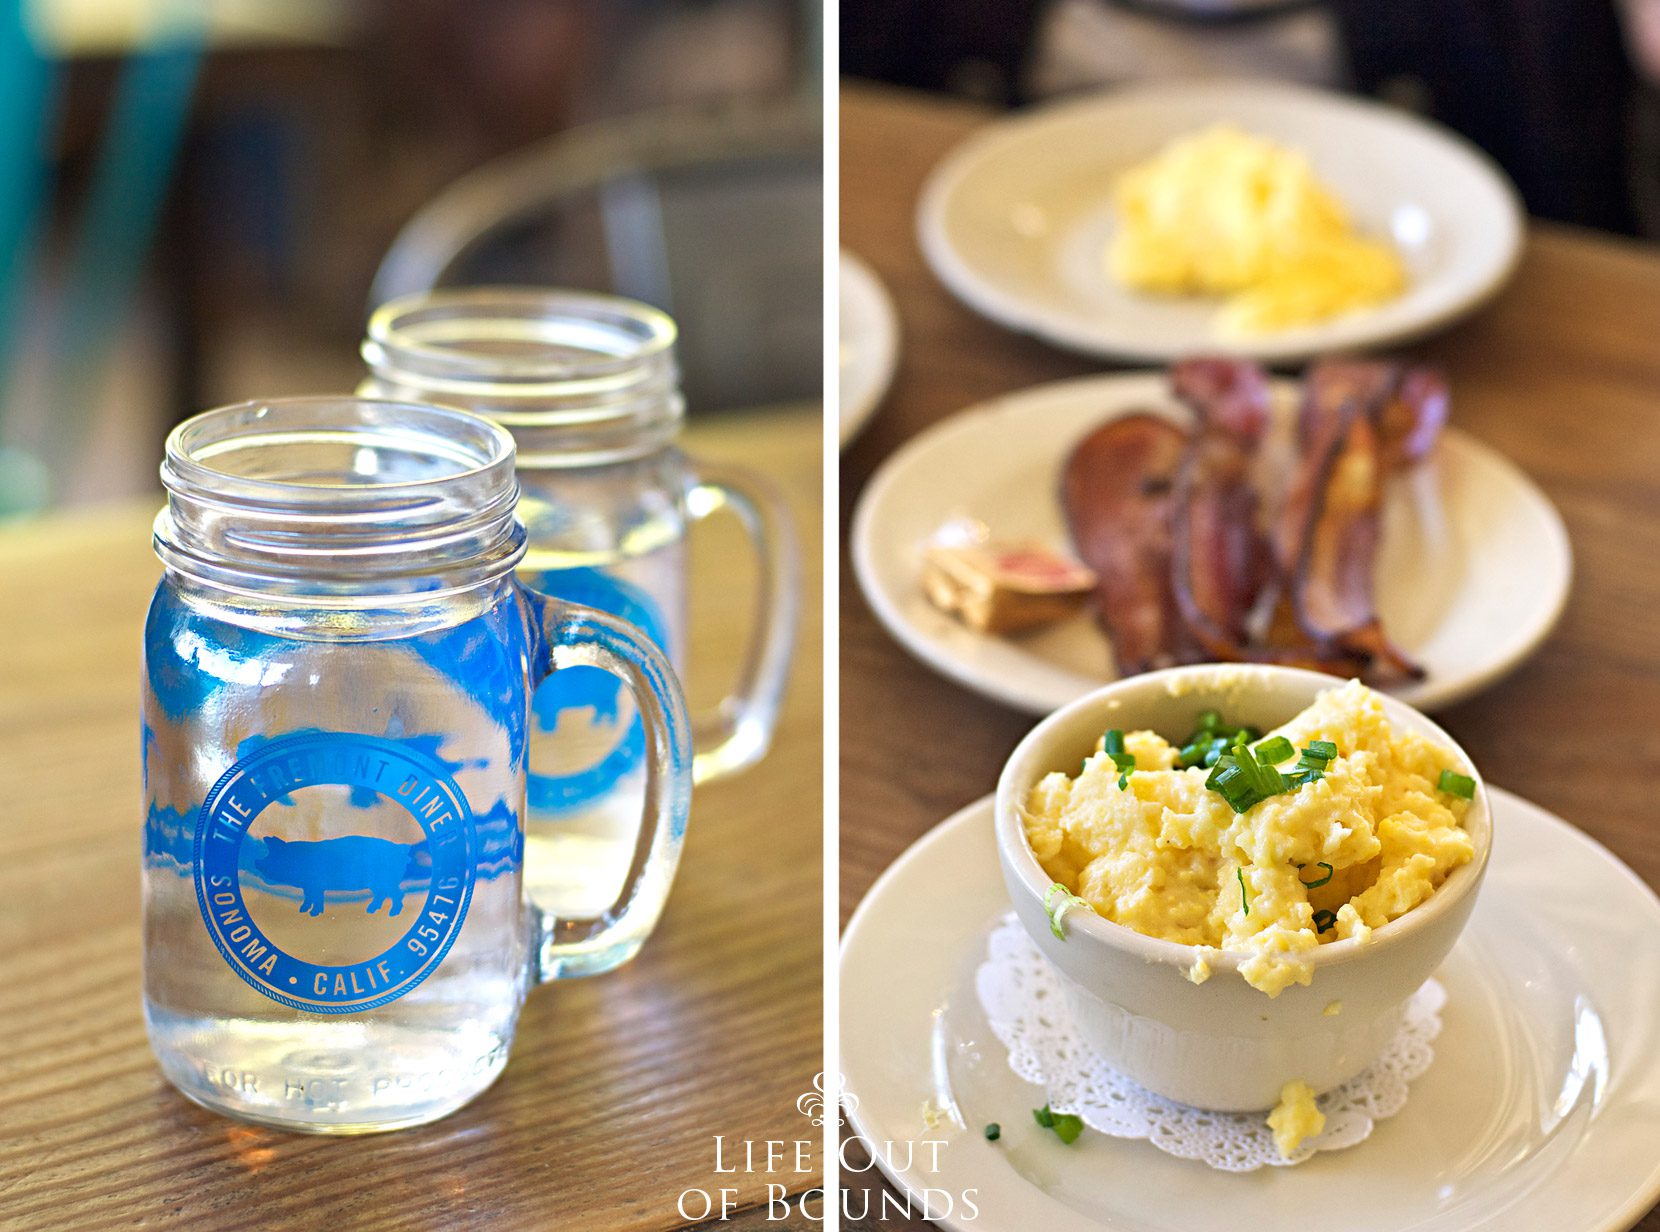 Water-jars-and-grits-bacon-and-scrambled-egg-at-The-Fremont-Diner-Sonoma-California